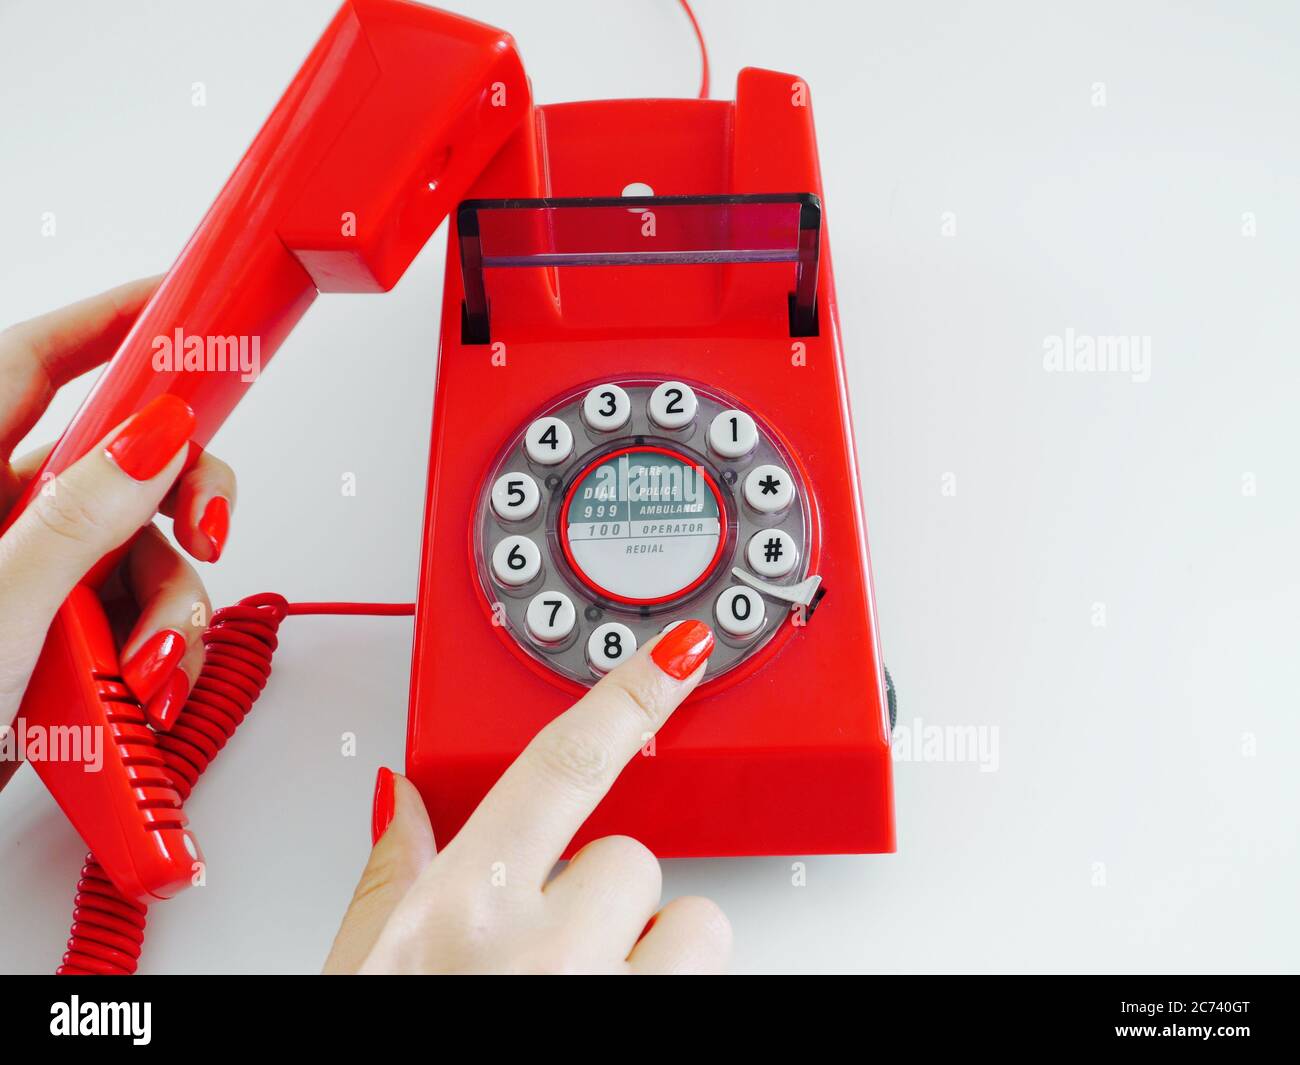 Female hands with red manicured nails make a telephone call, dialling the number 9 Stock Photo